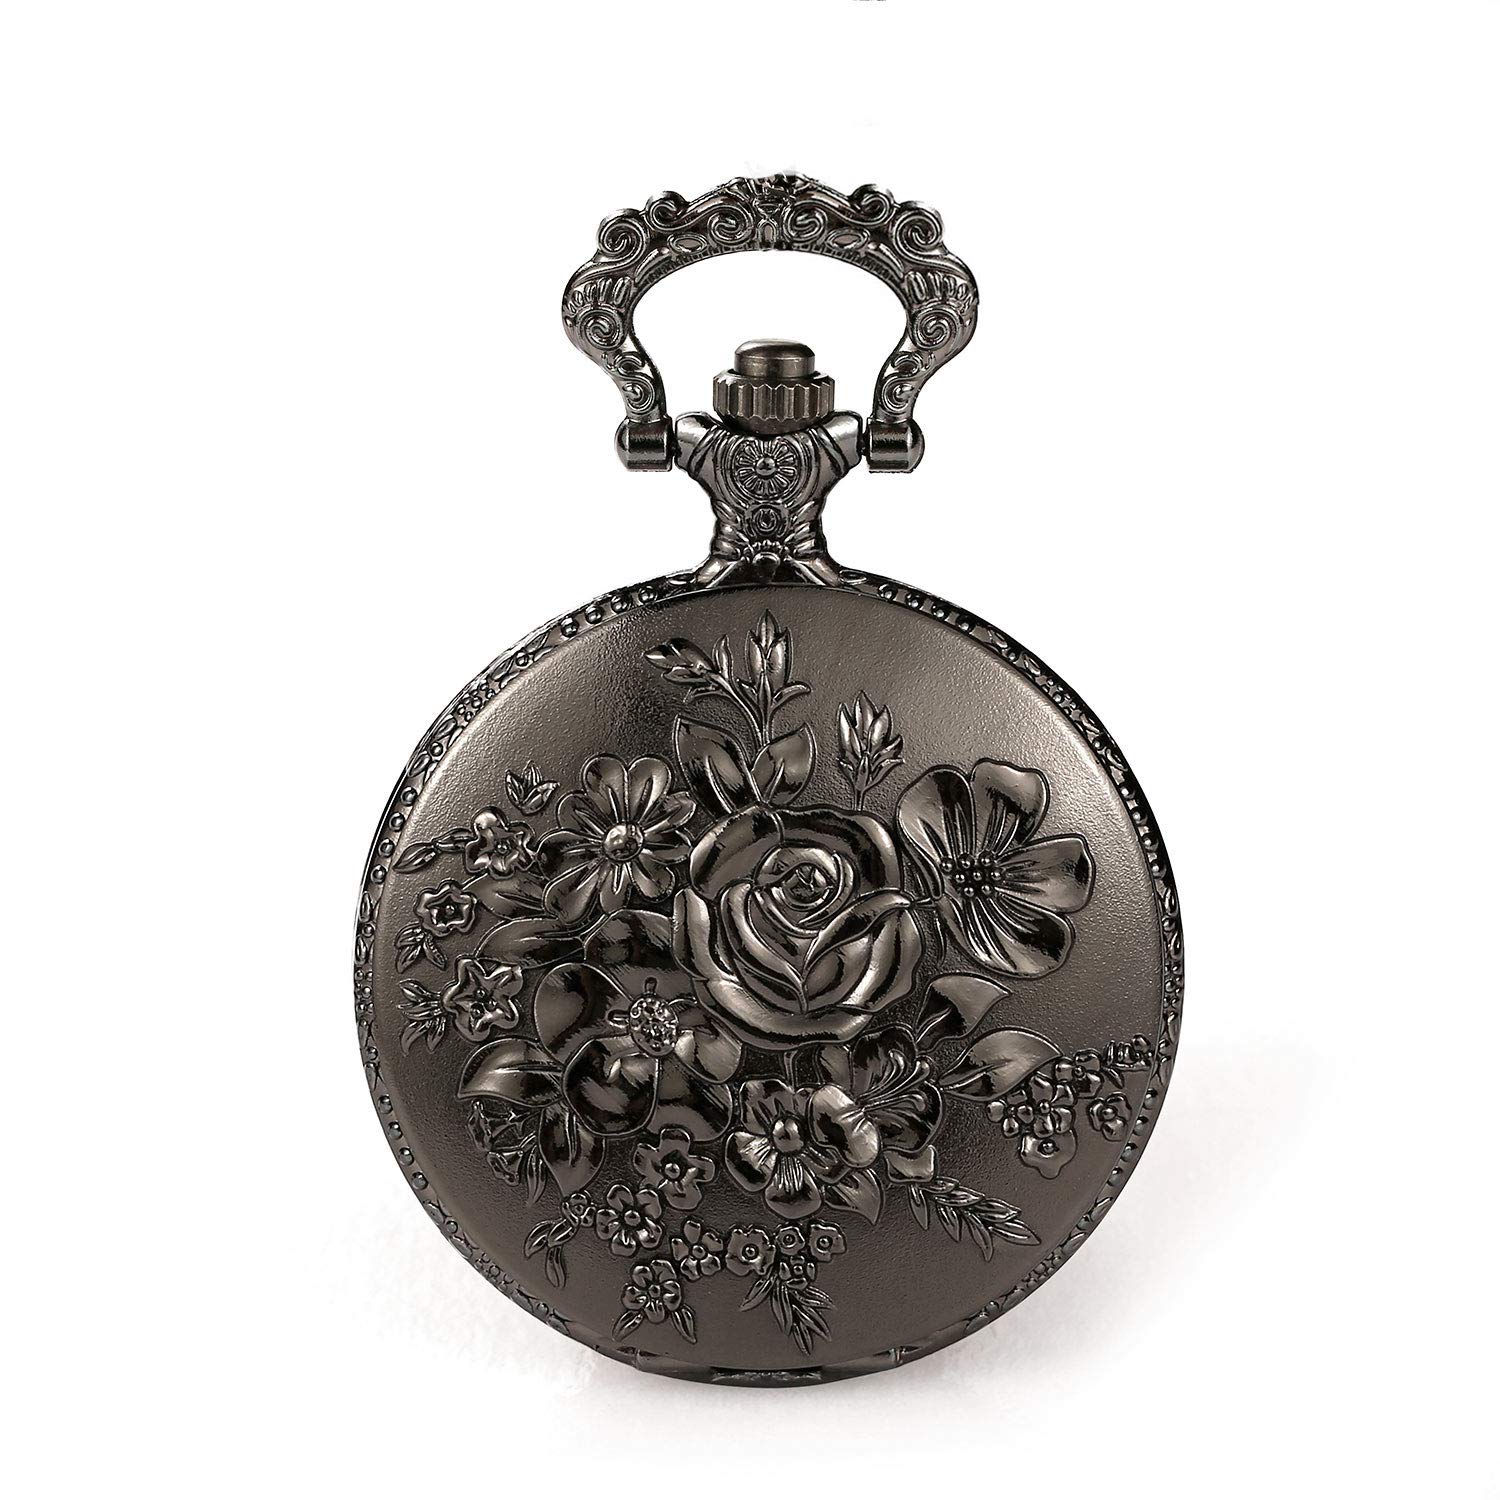 BOSHIYA Retro Flower Openwork Cover Quartz Pocket Watch with Chain Half Hunter Pocket Watches for Women with Box, for Mother's Day